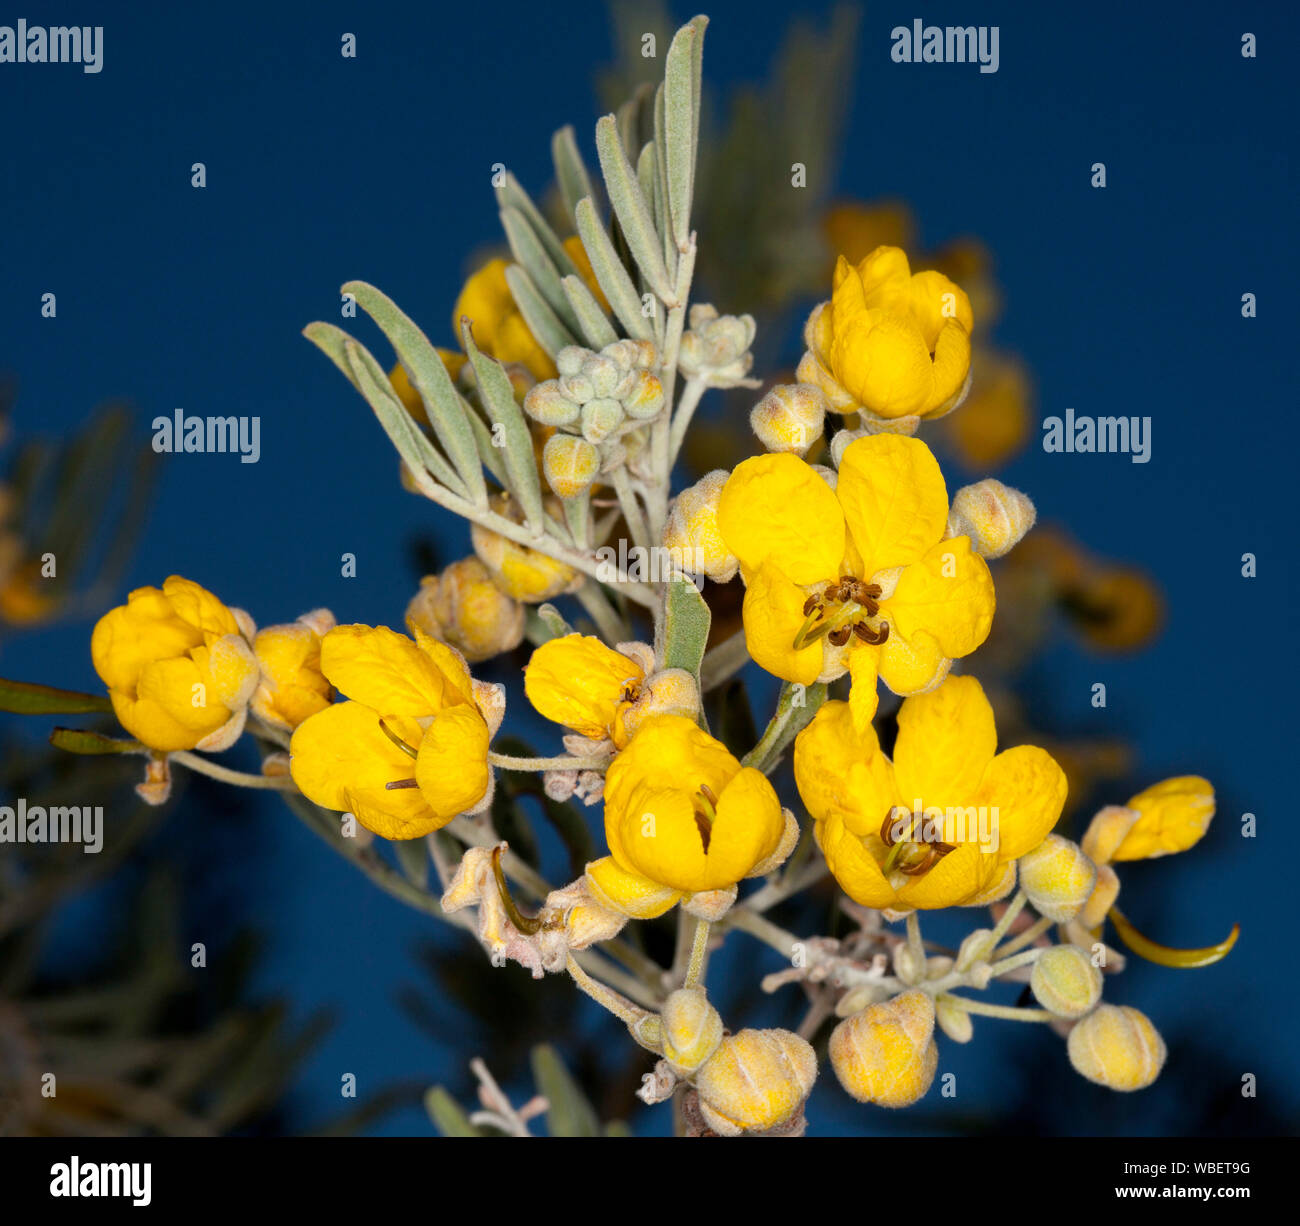 Cluster of bright yellow flowers & grey green leaves of Senna / Cassia artemisioides against background of blue sky in outback Australia - wildflowers Stock Photo